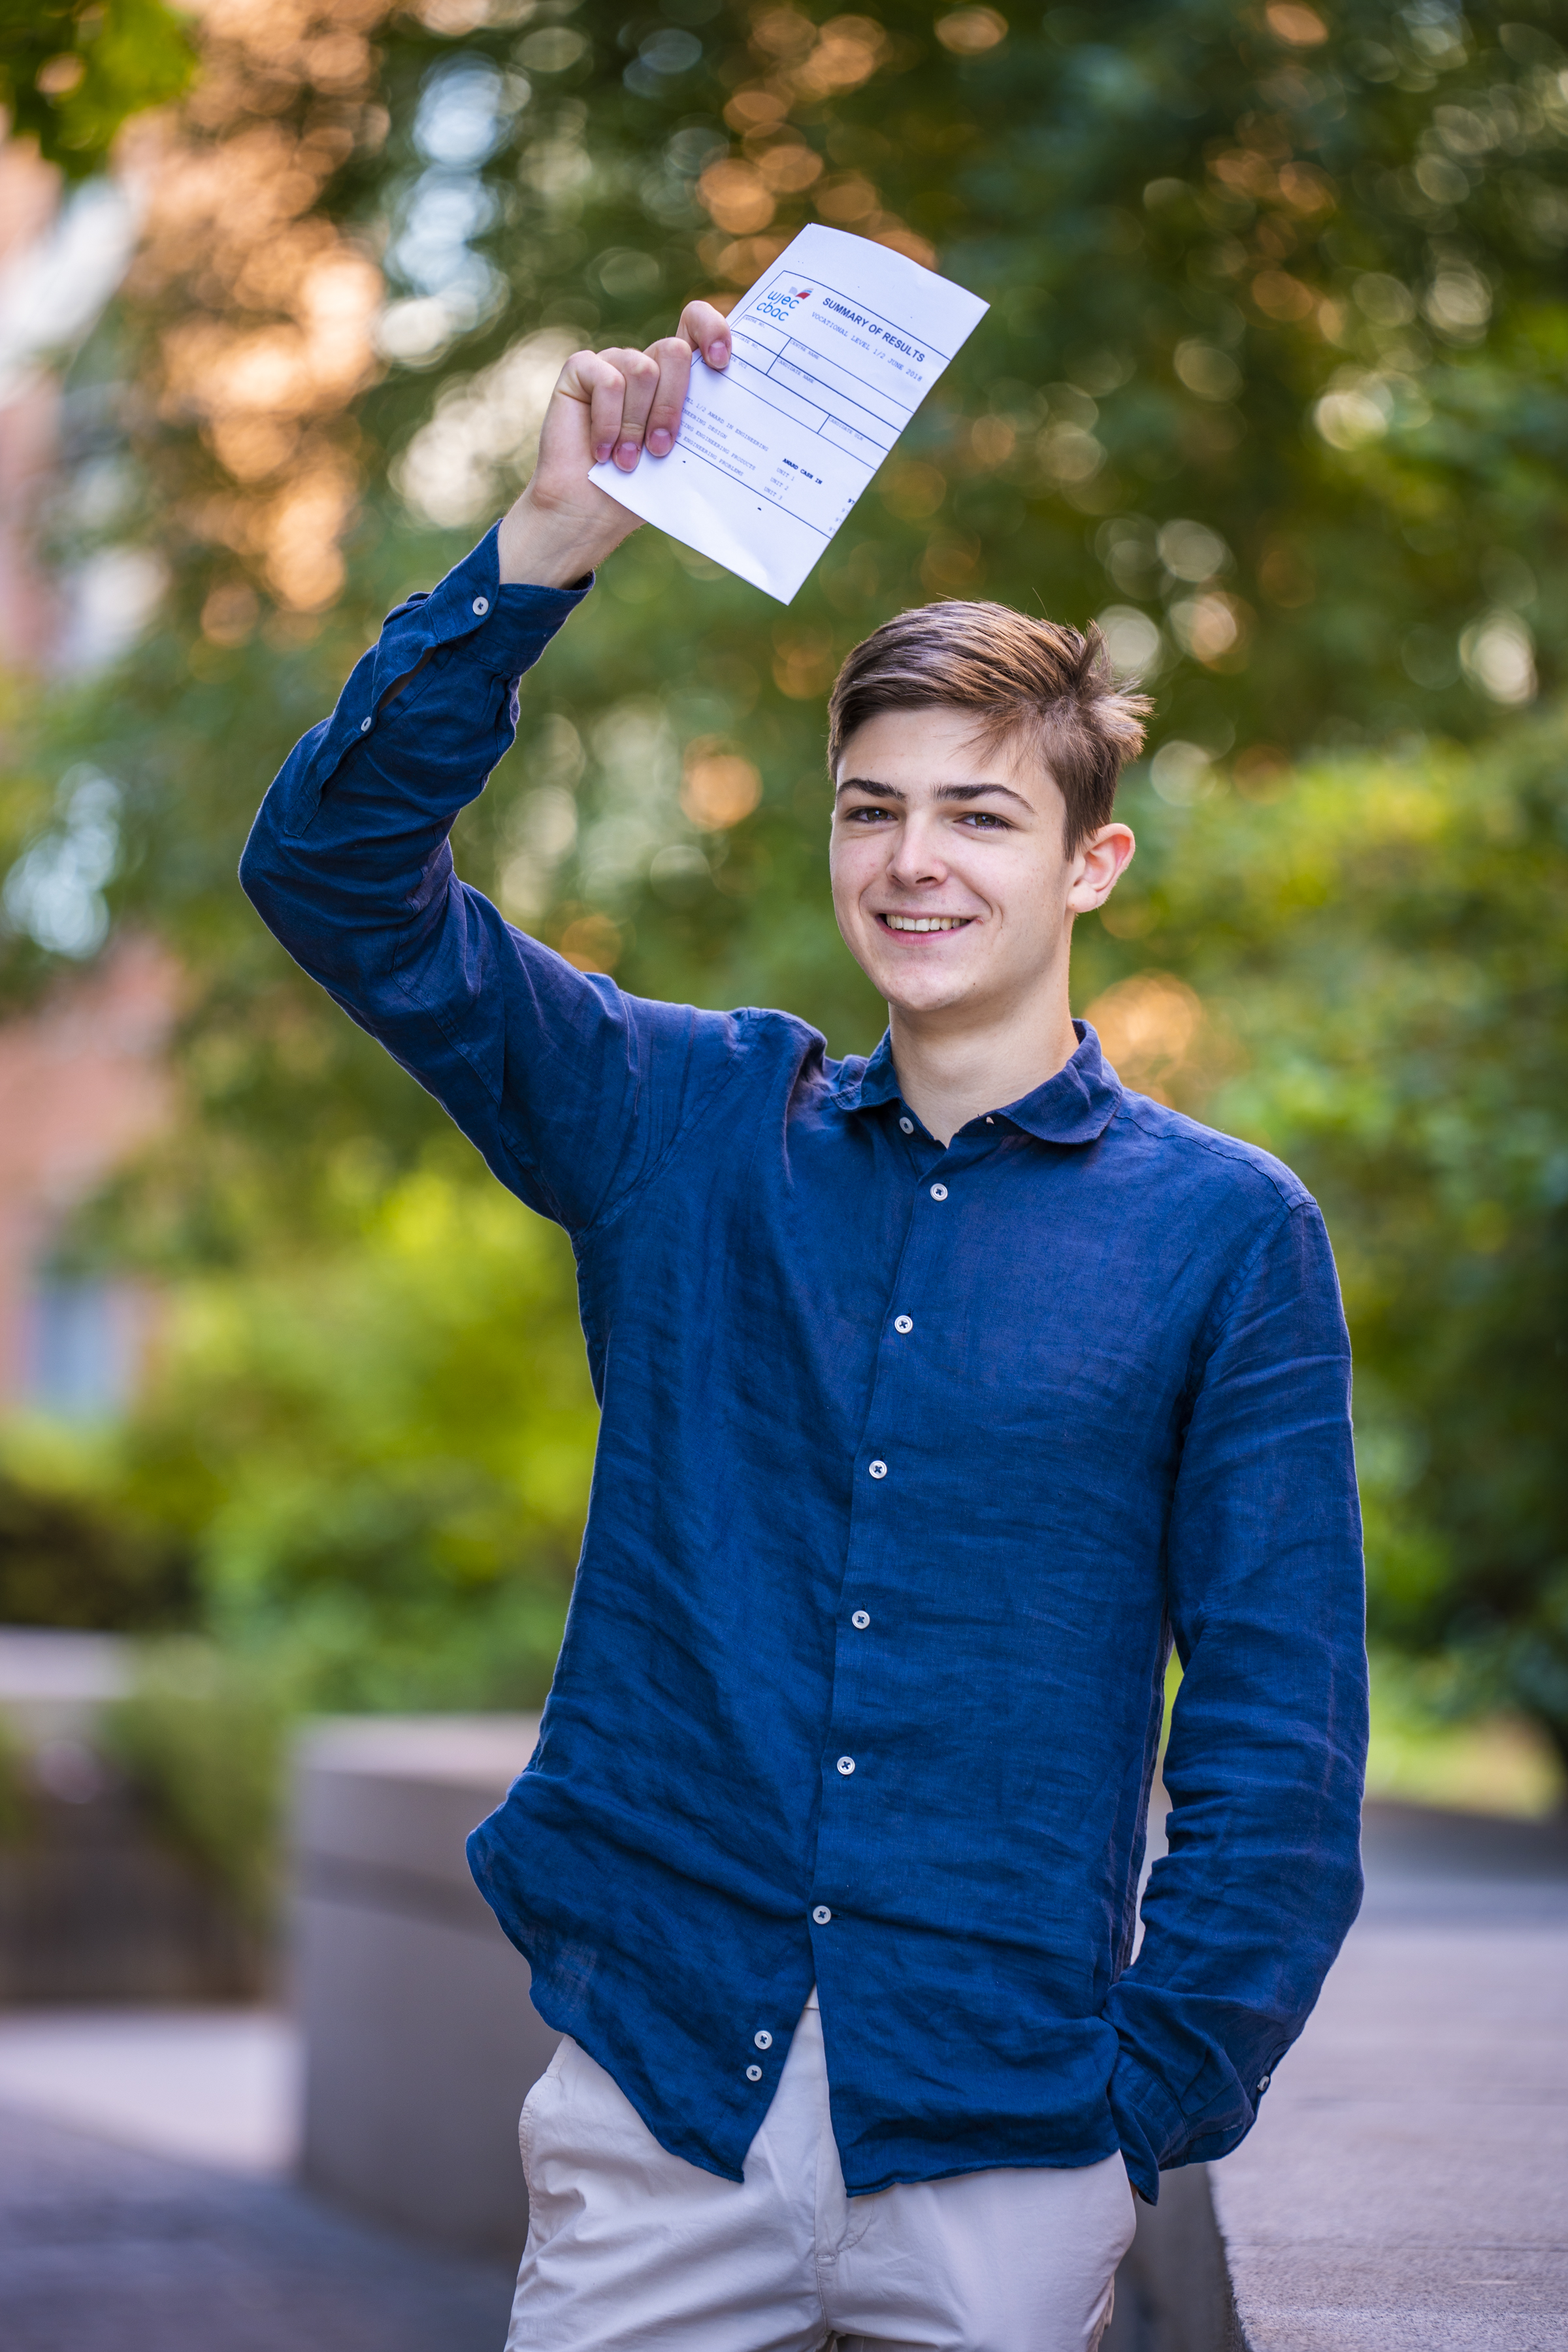 Zorian is off to Durham University to study Biological Sciences. (Neil Phillips/Cardiff Sixth Form College)